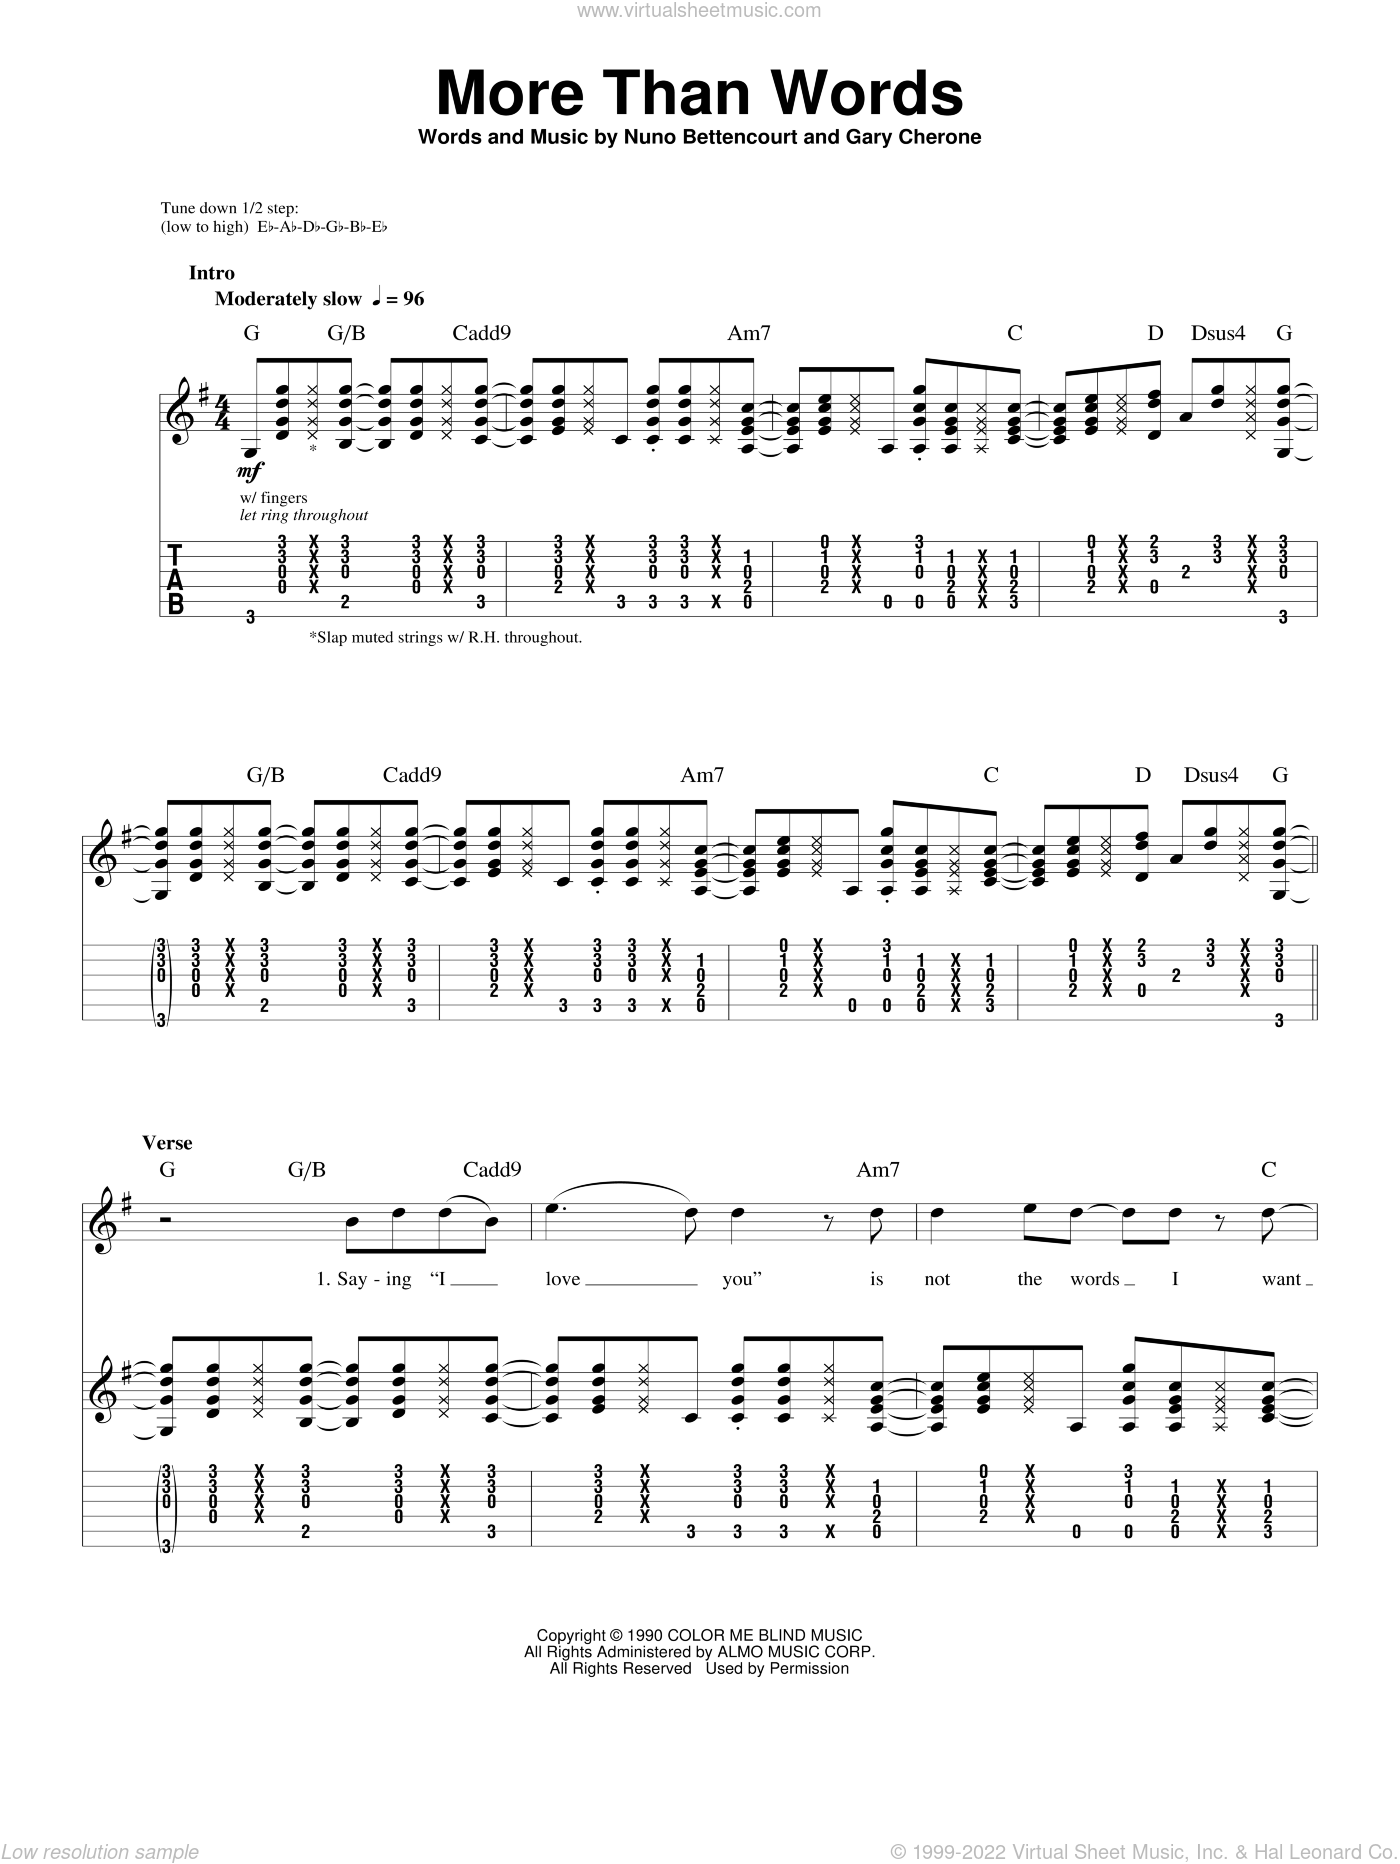 guitar chords to more than words